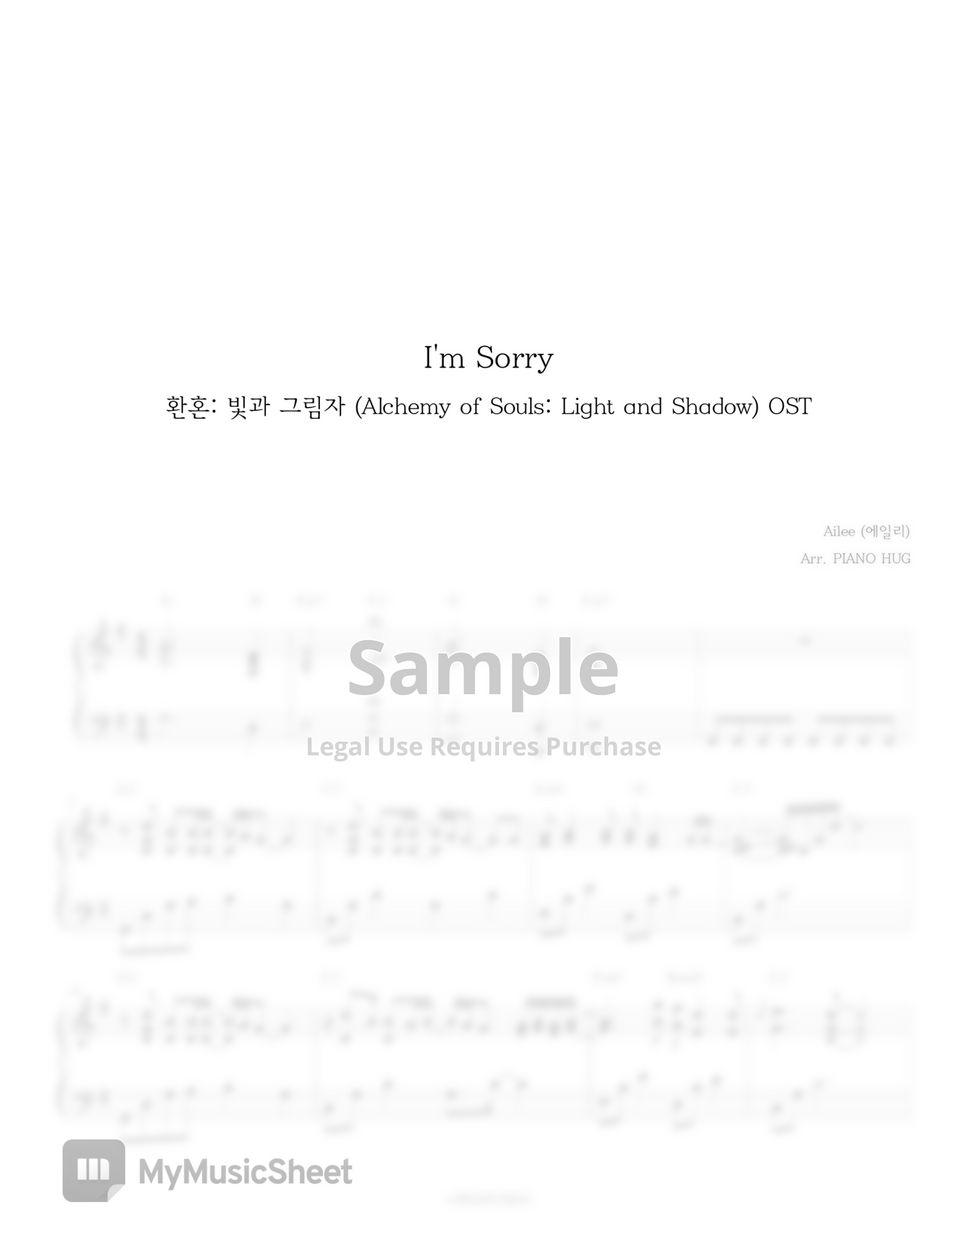 Alchemy of Souls2, Light and Shadow OST - Ailee (에일리) - I'm Sorry by Piano Hug